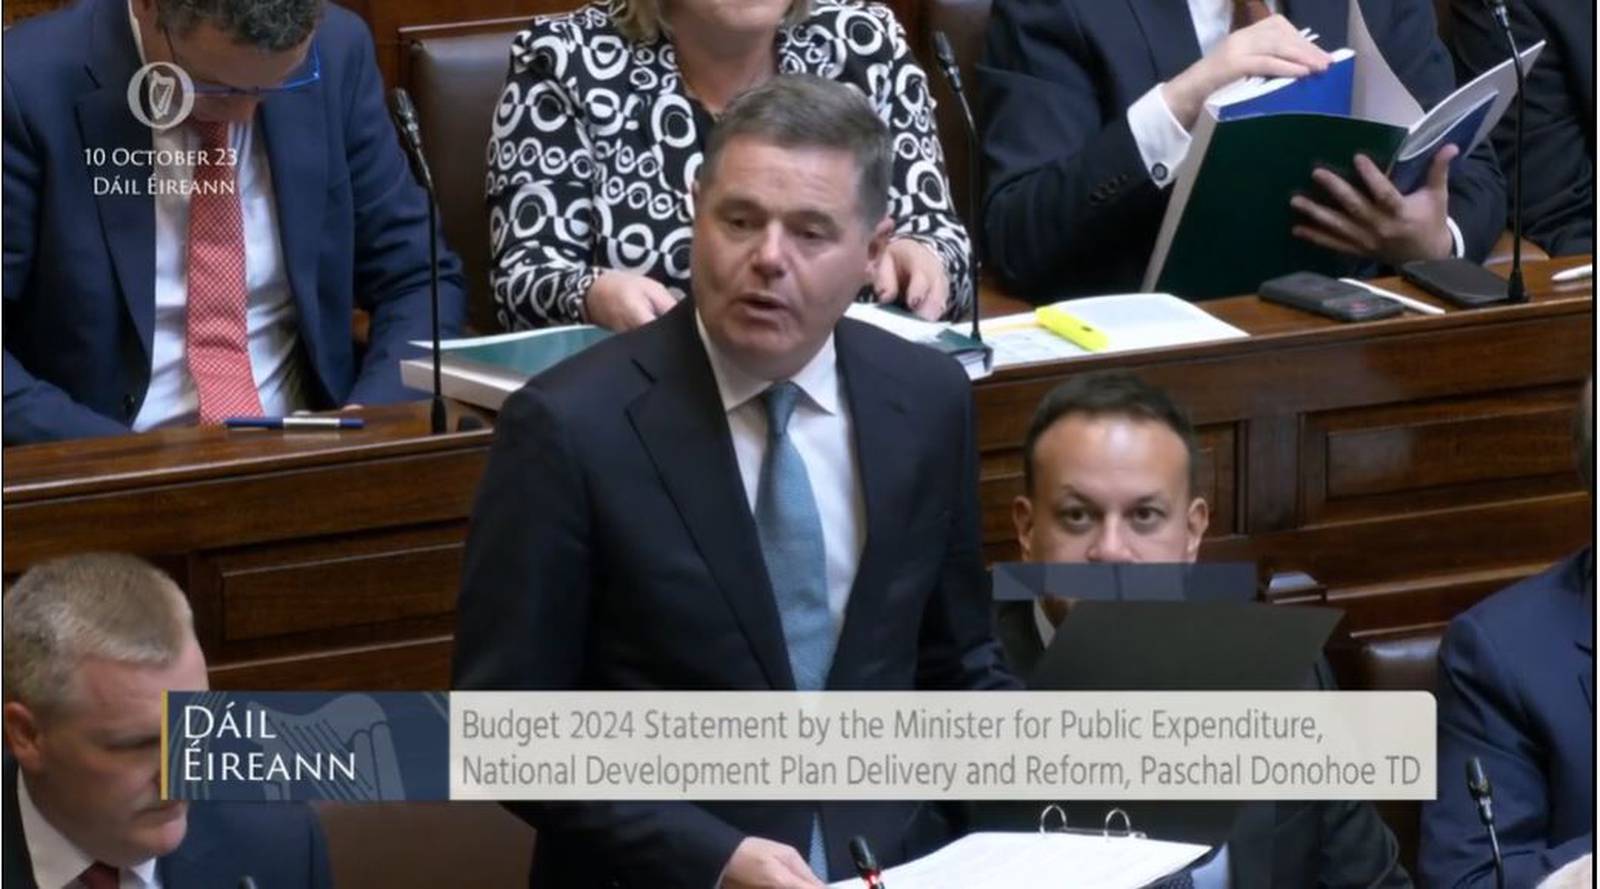 Minister for Public Expenditure and Reform Paschal Donohoe delivers his speech